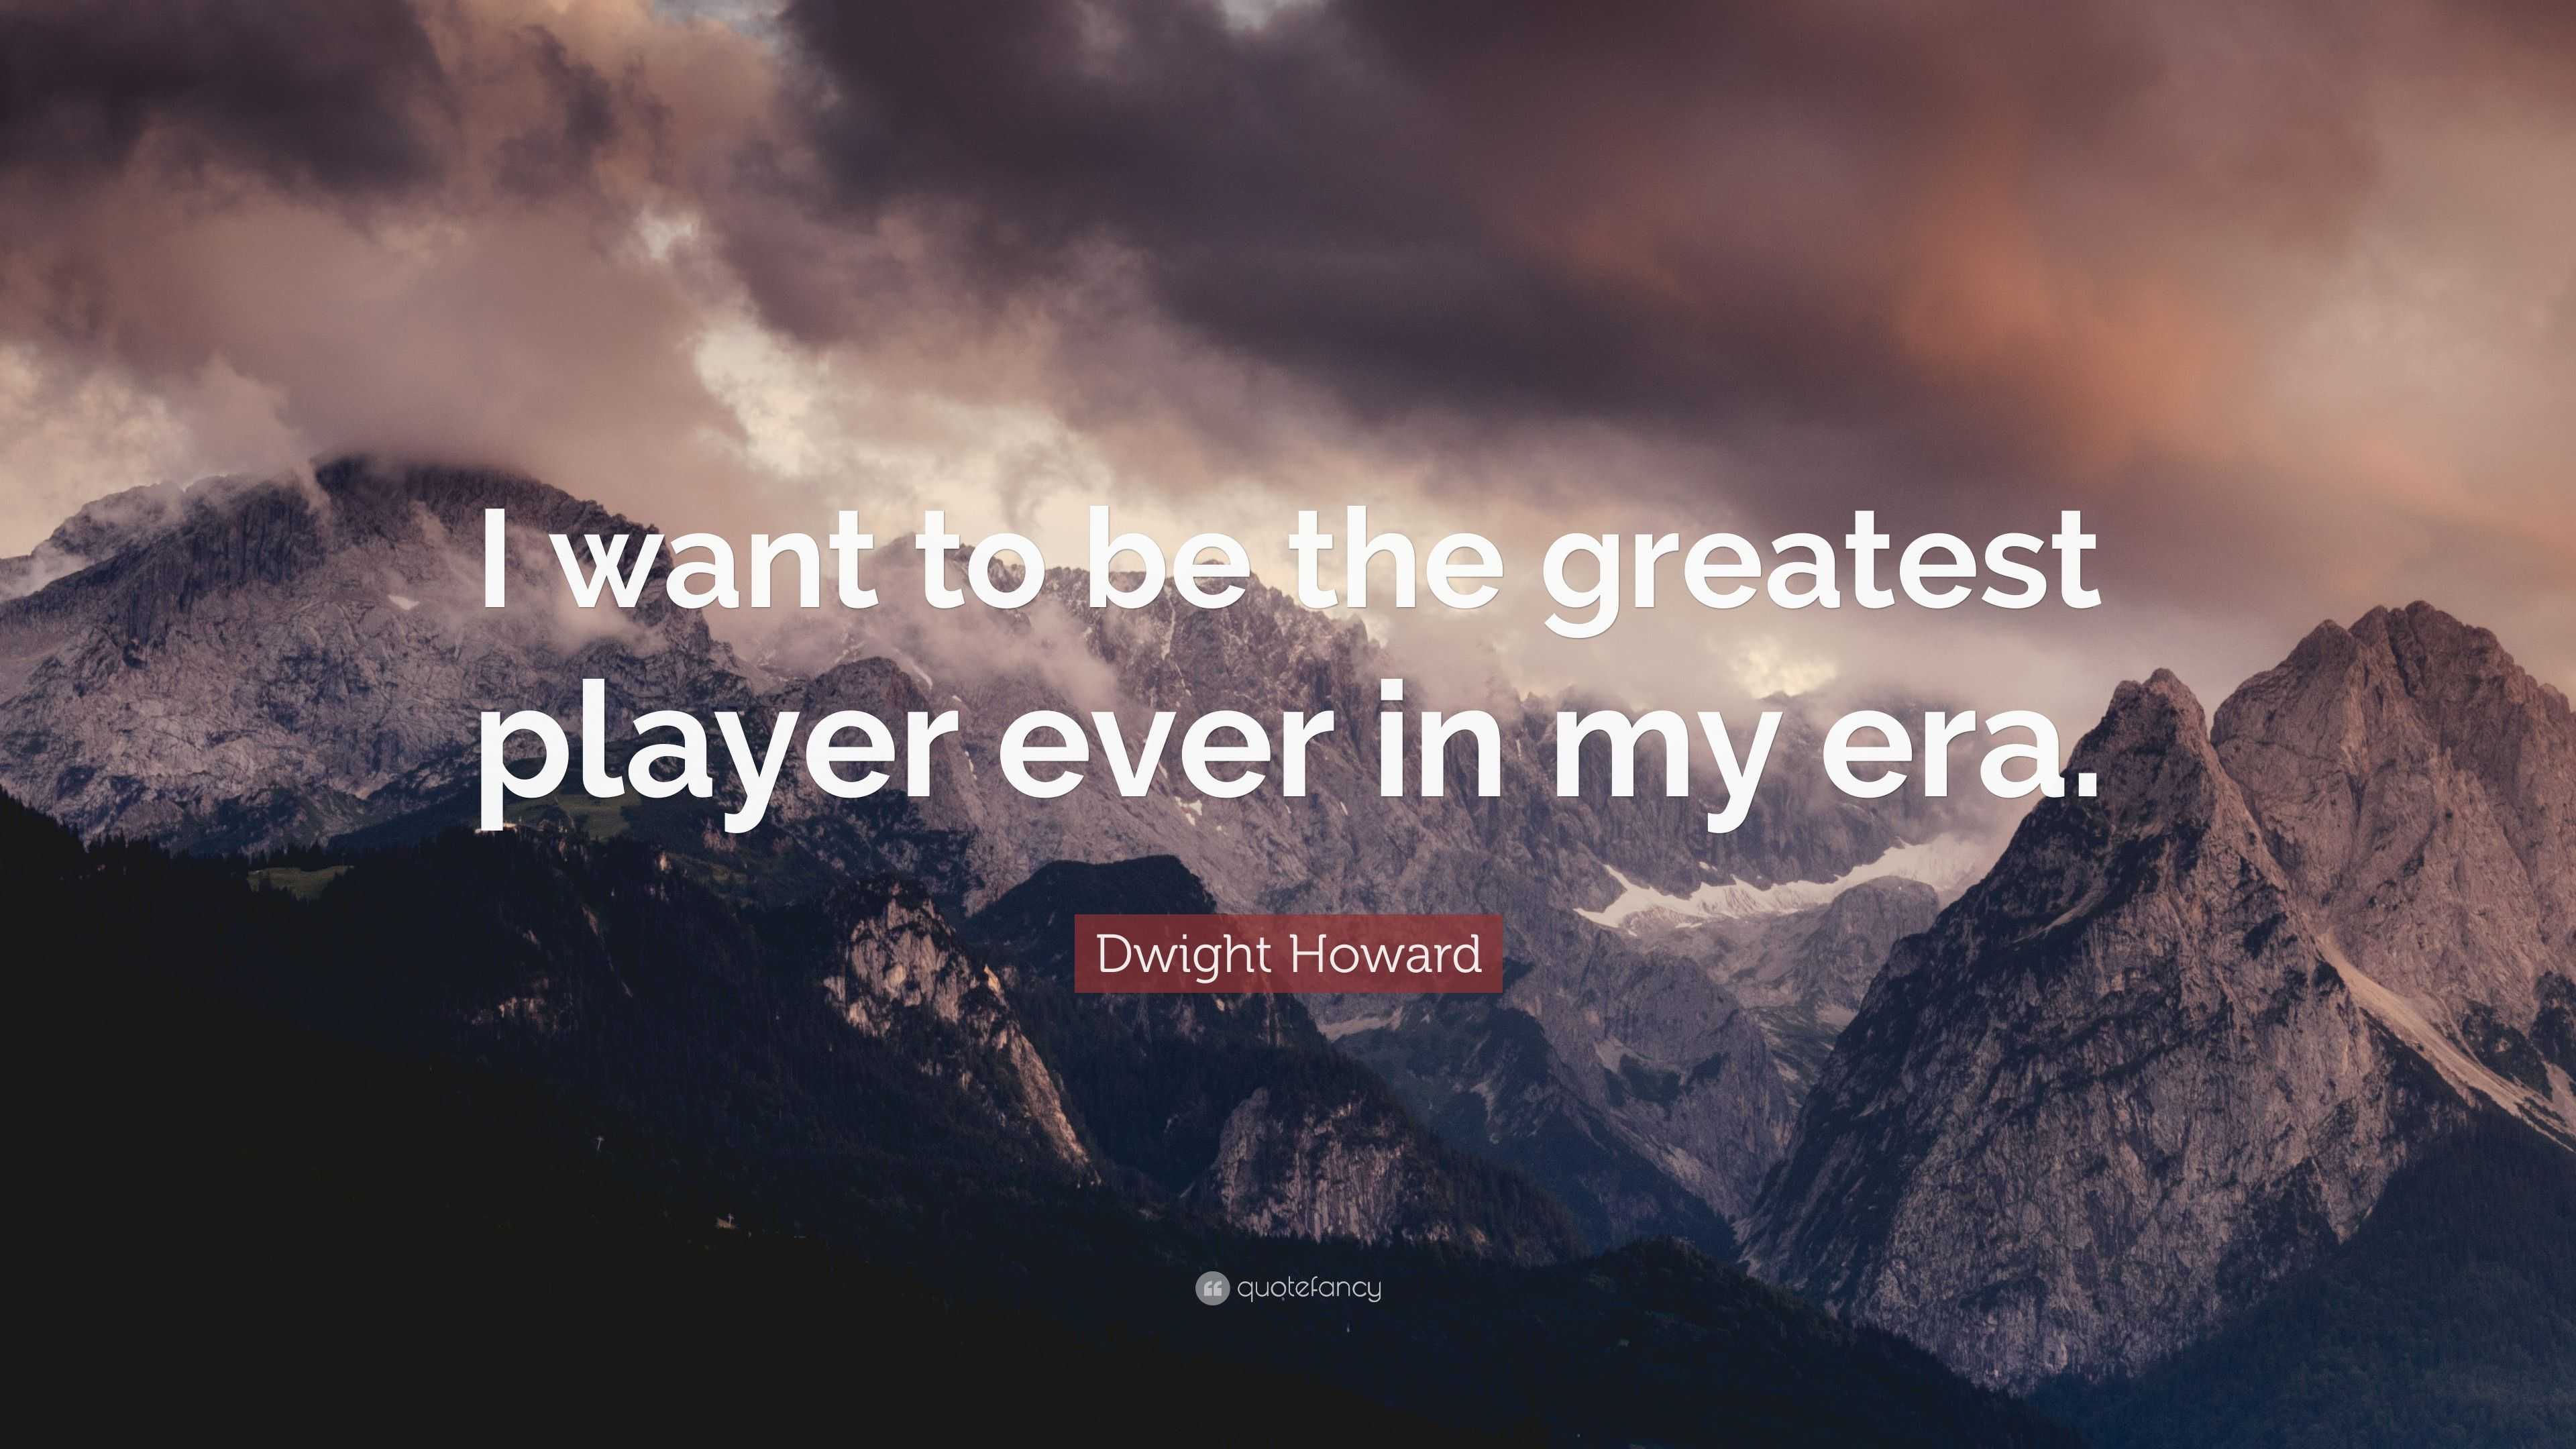 Dwight Howard quote: I want to be the greatest player ever in my